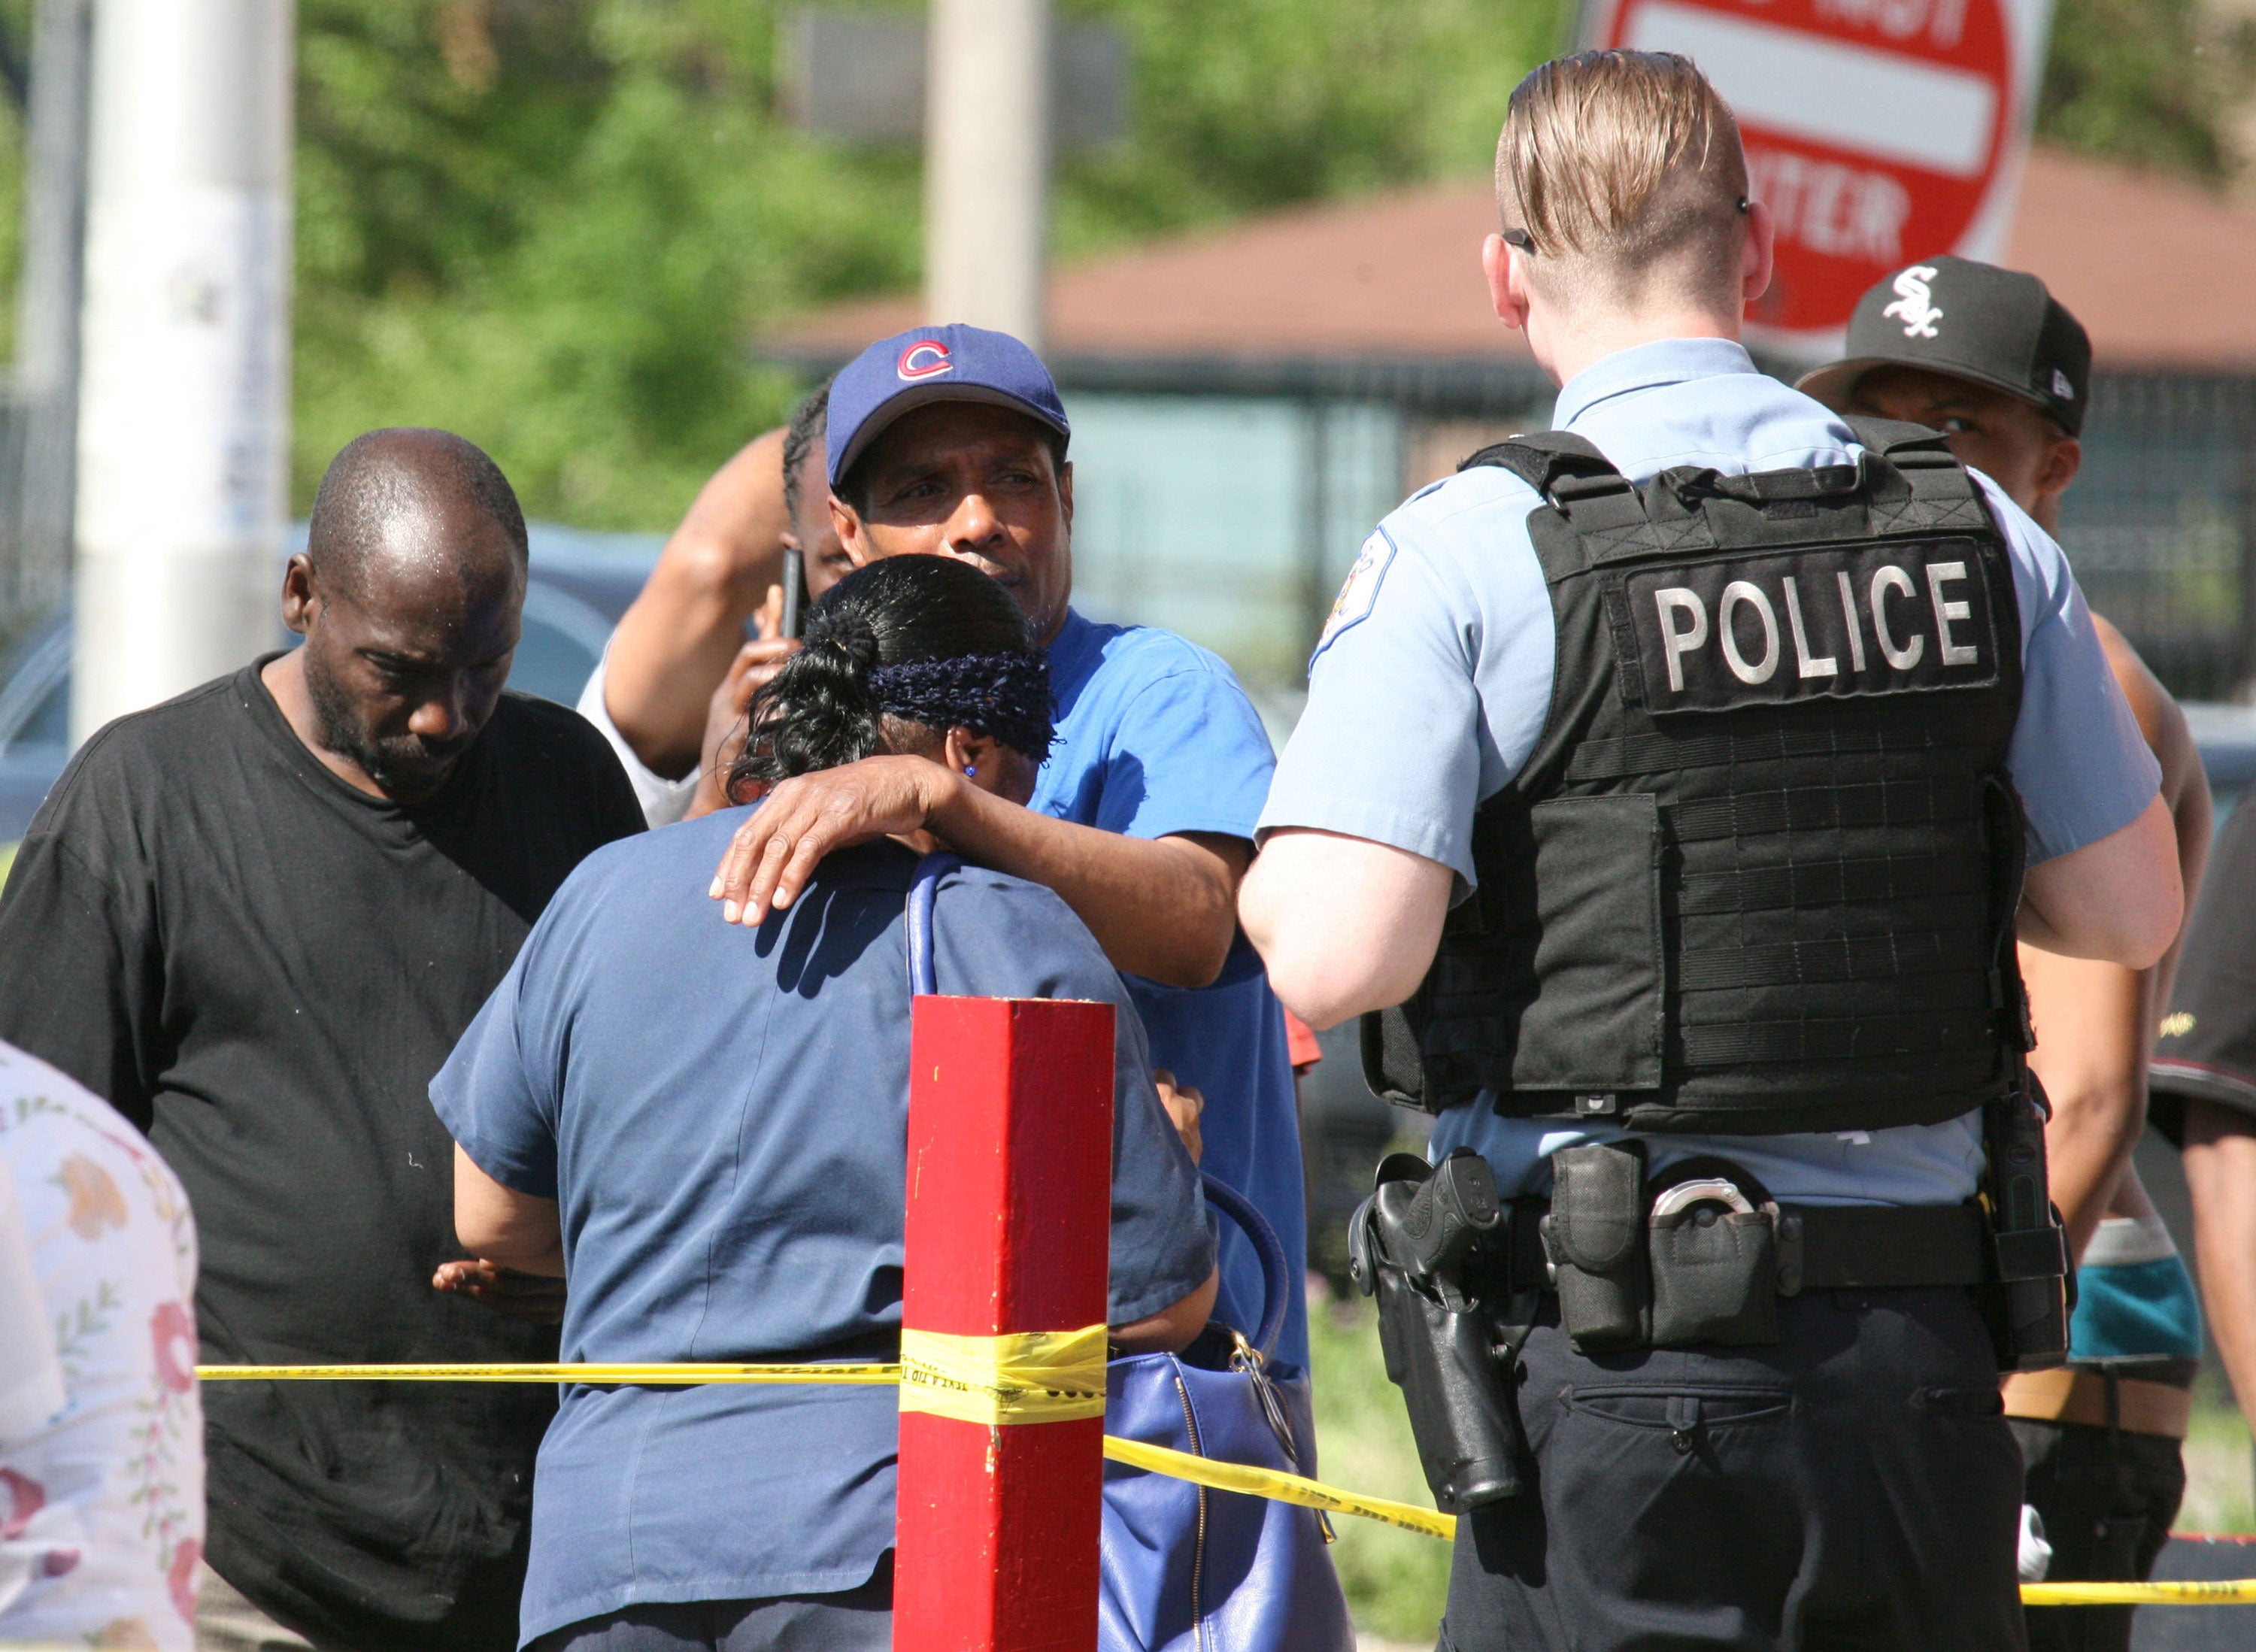 More Than 60 Shot in Chicago Violence Over Memorial Day Weekend
